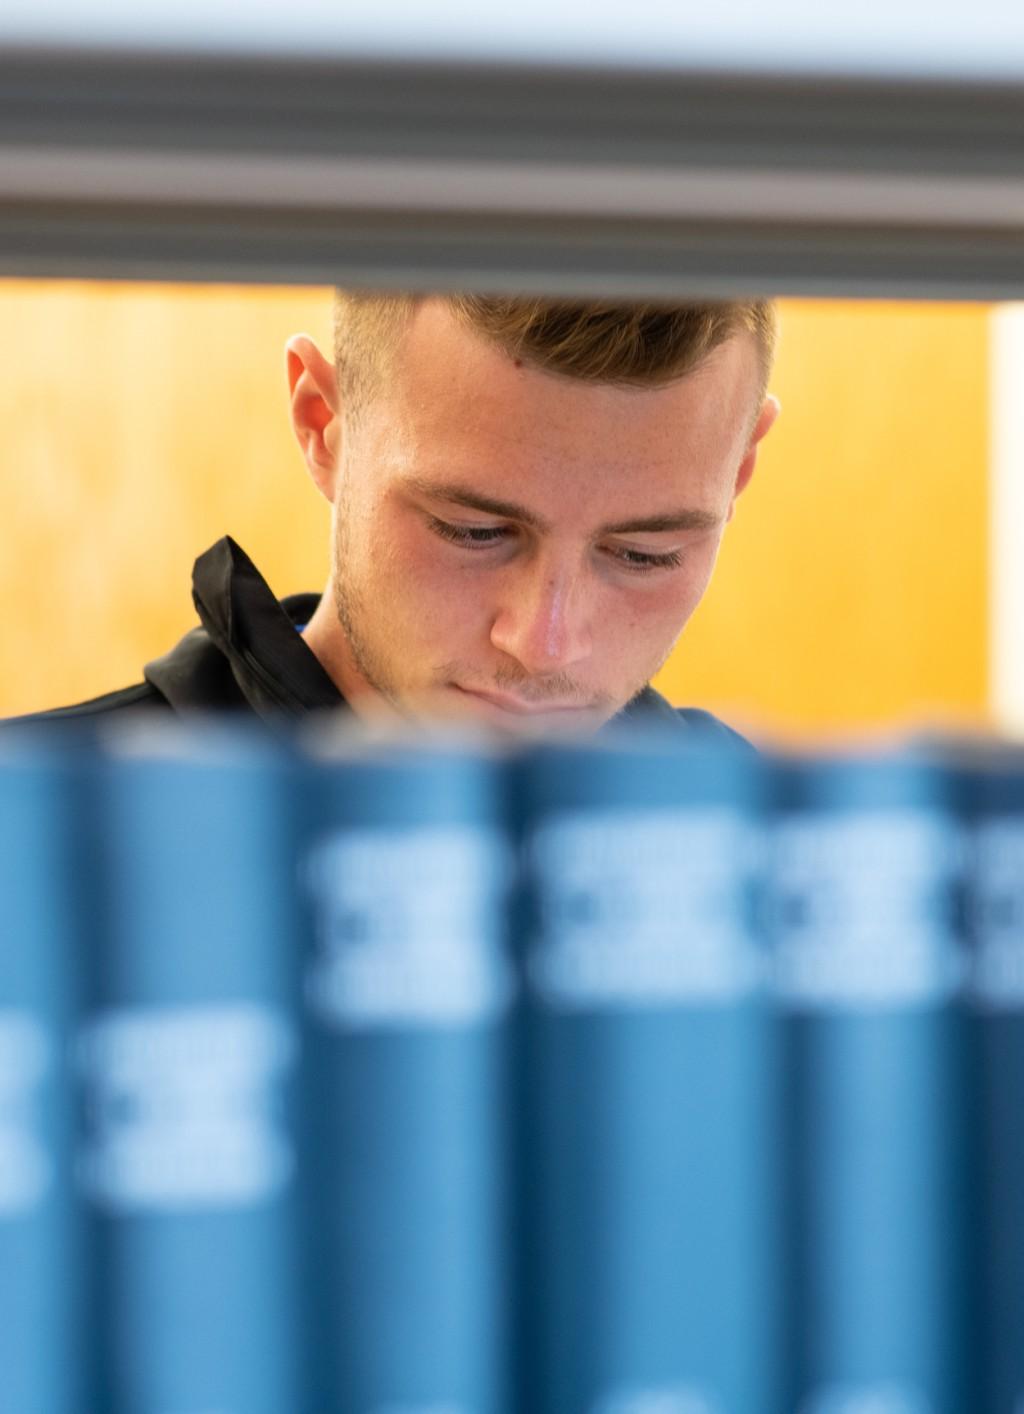 A student stands behind a row of books in the Ketchum Library